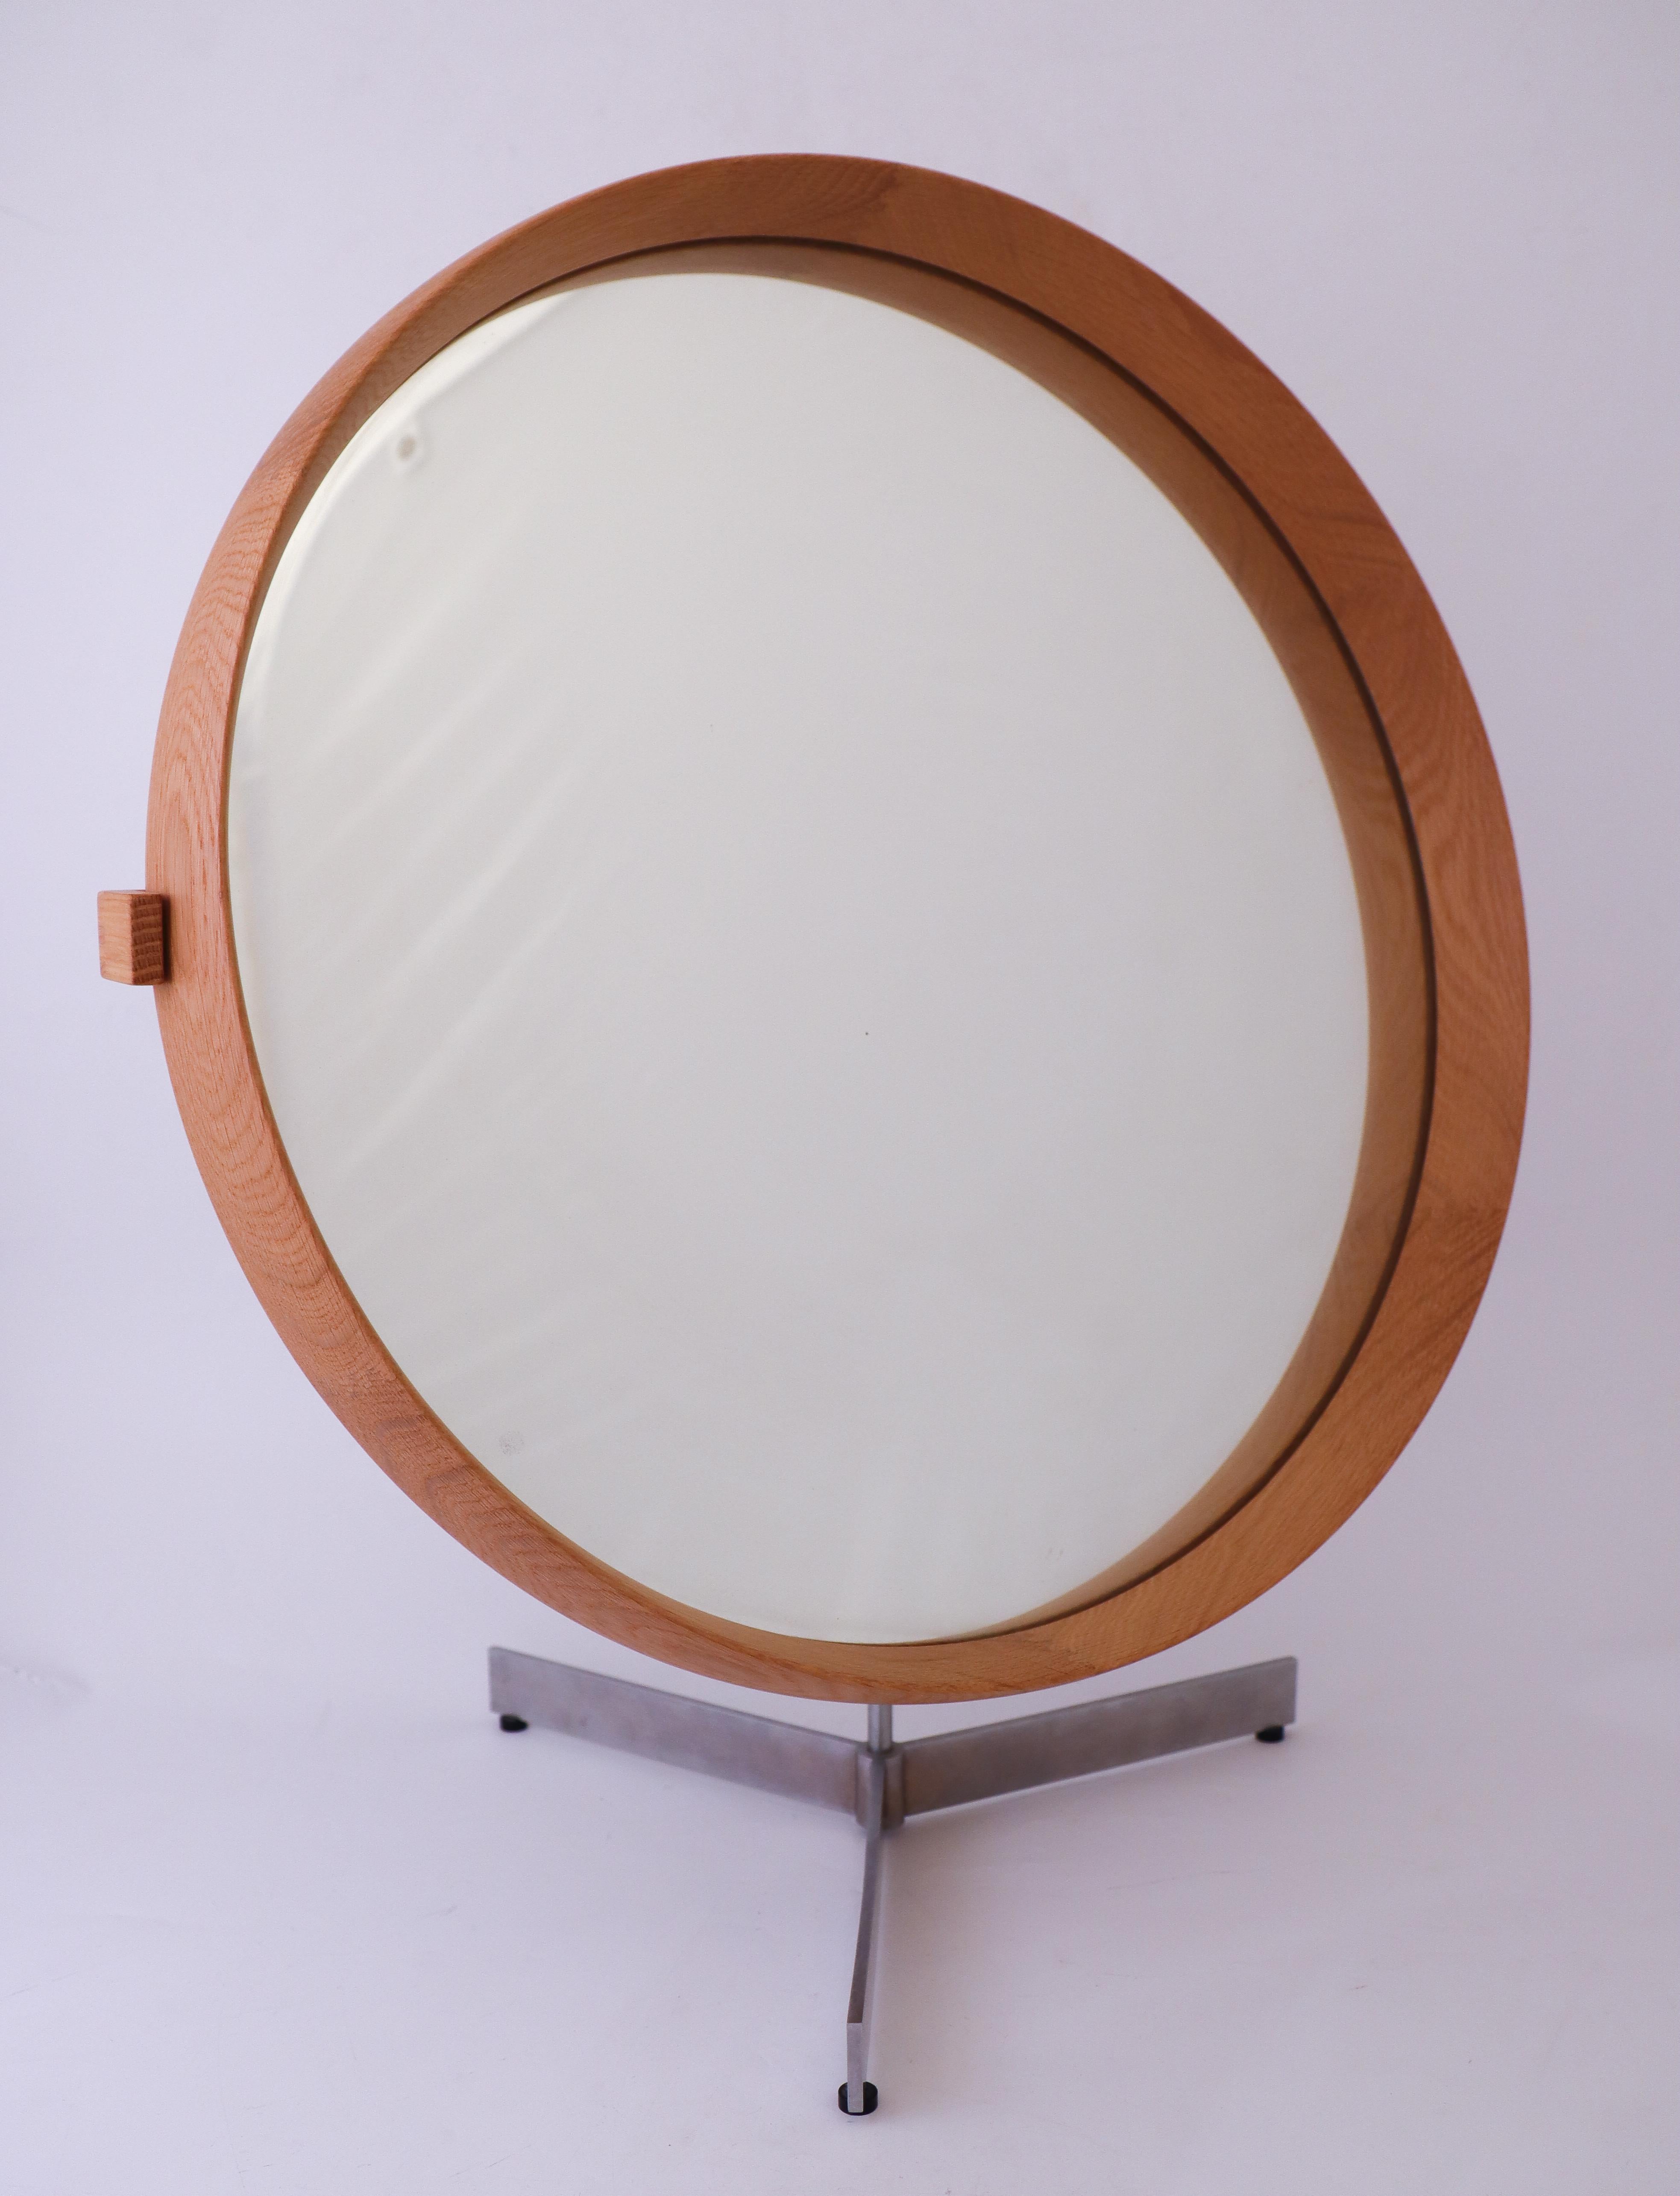 A lovely table mirror designed by Uno & Östen Kristiansson. Produced by Luxus in Vittsjö, Sweden in the 1960s. Base in brushed aluminum and the frame in oak. It is adjustable in angle and swiveling. It is in mint condition, This is a lovely mid